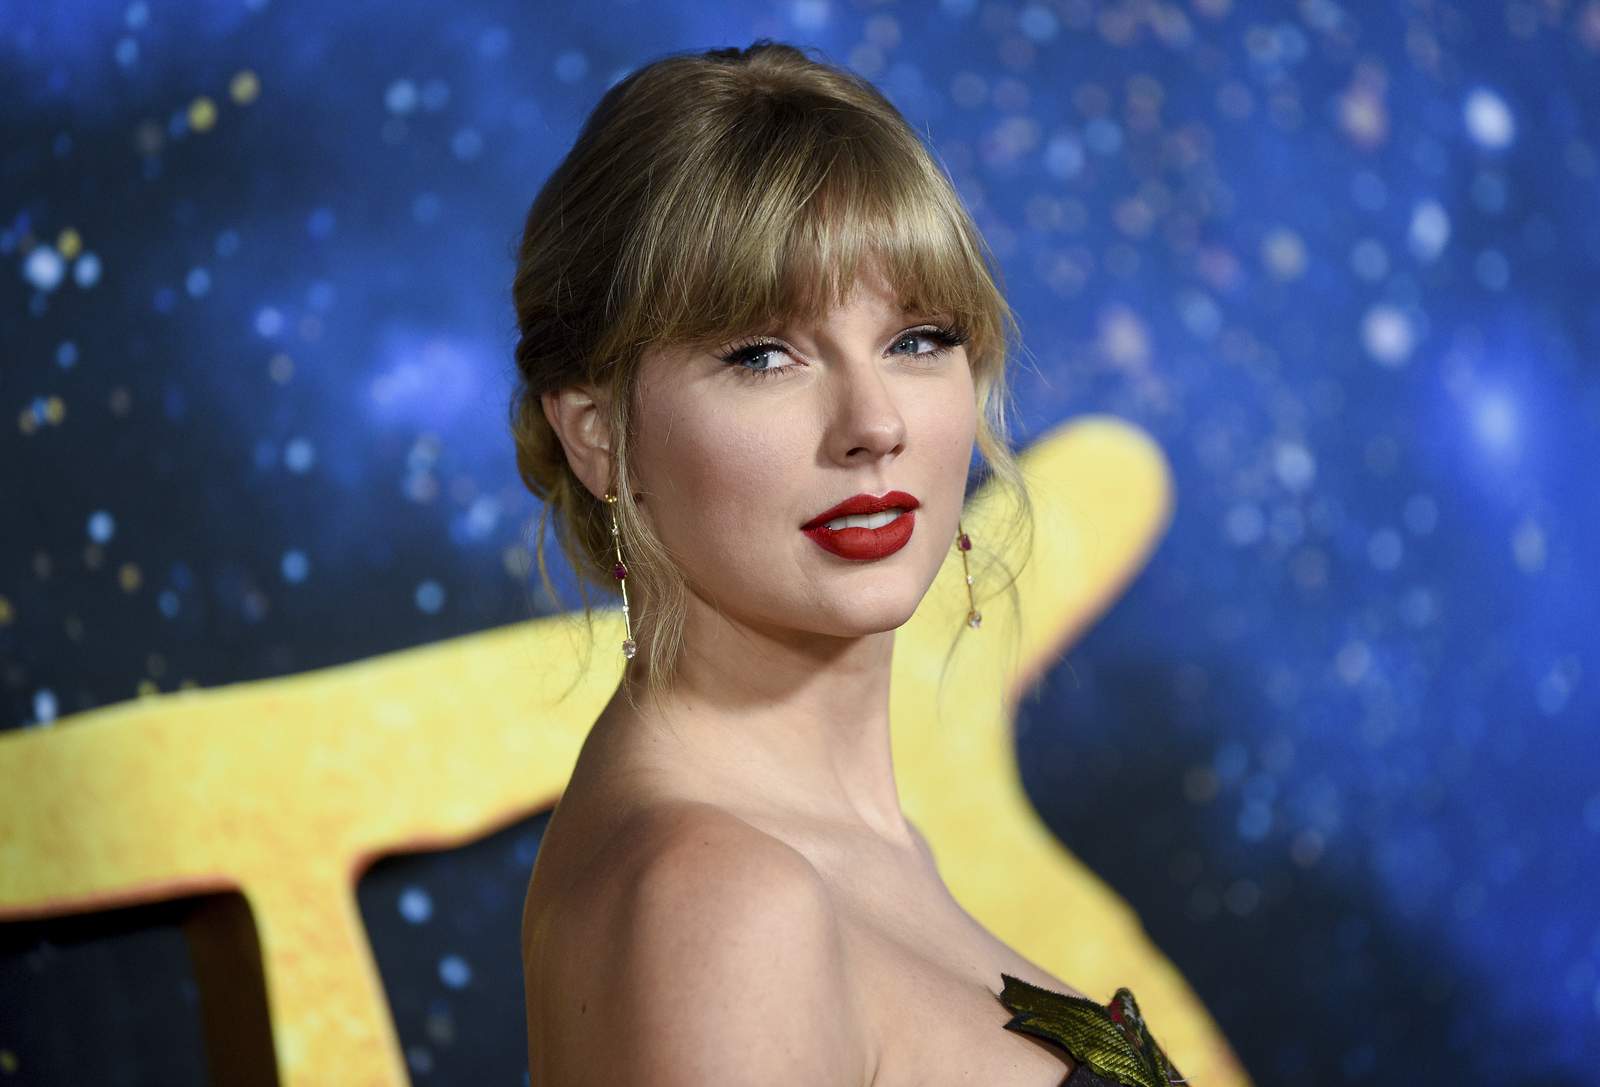 Taylor Swift ‘folklore’ concert film coming to Disney+